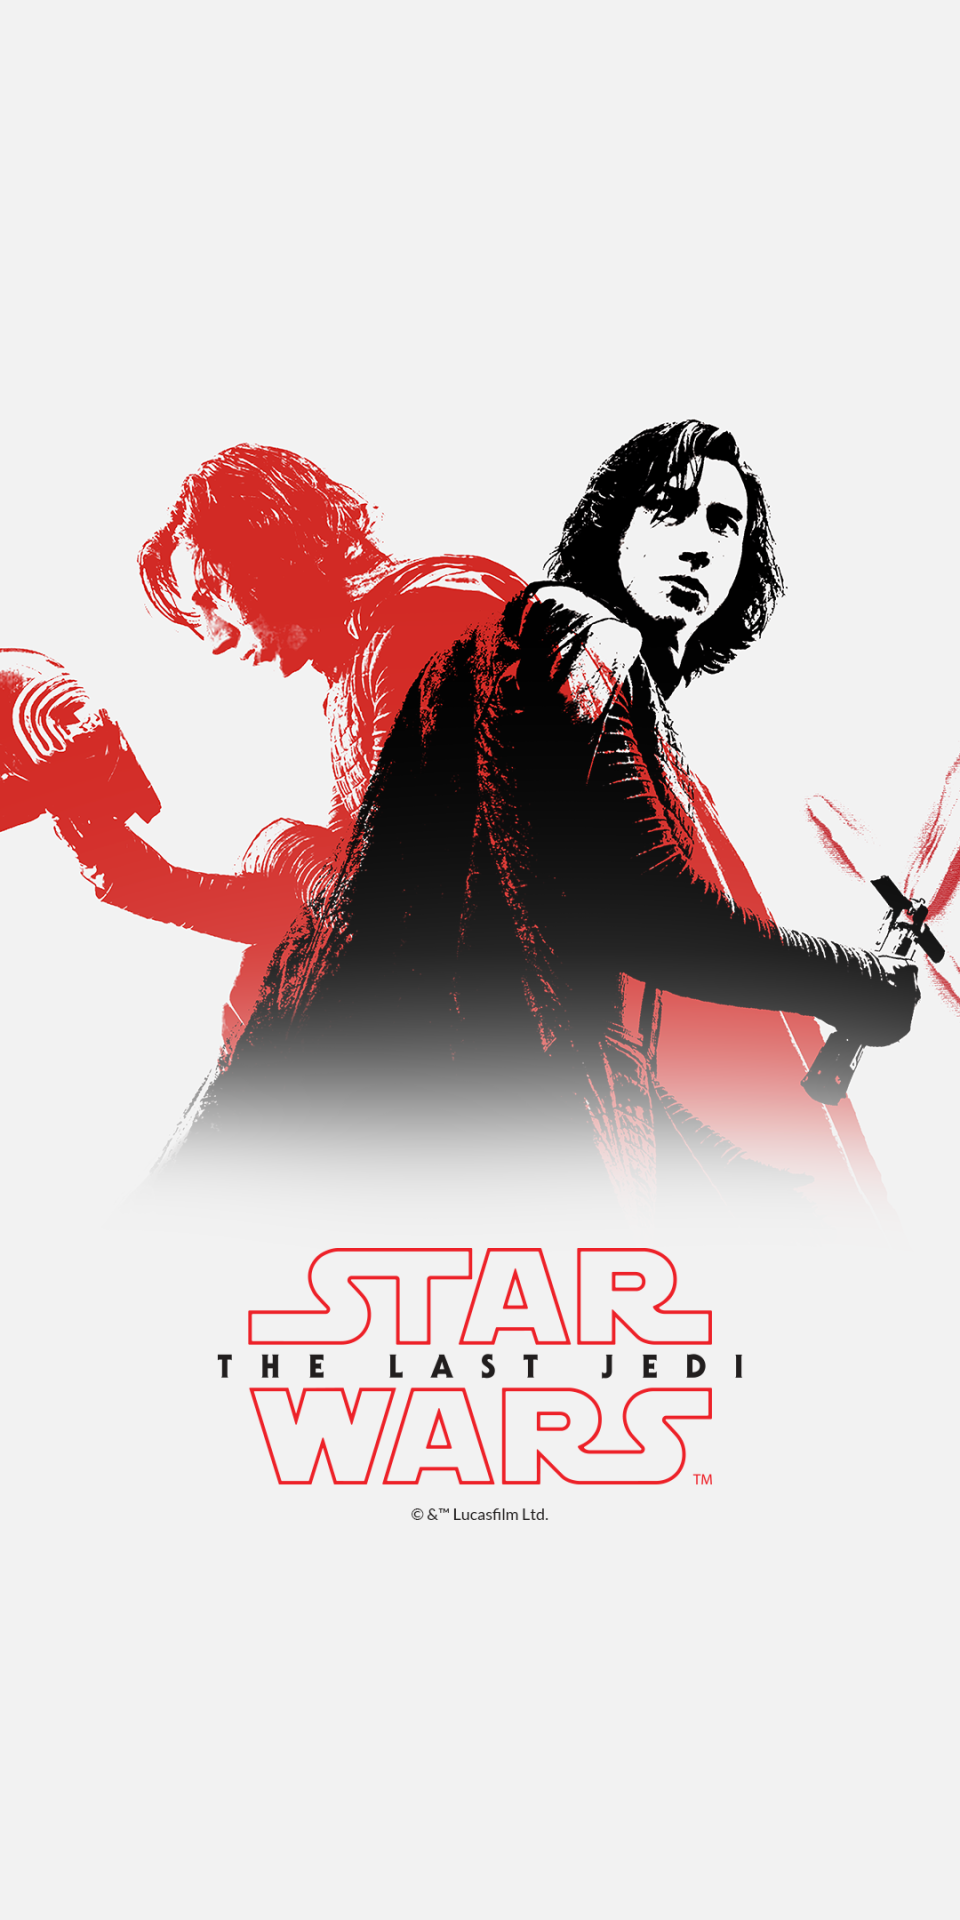 OnePlus 5T Star Wars edition mobile wallpaper featuring Kylo Ren